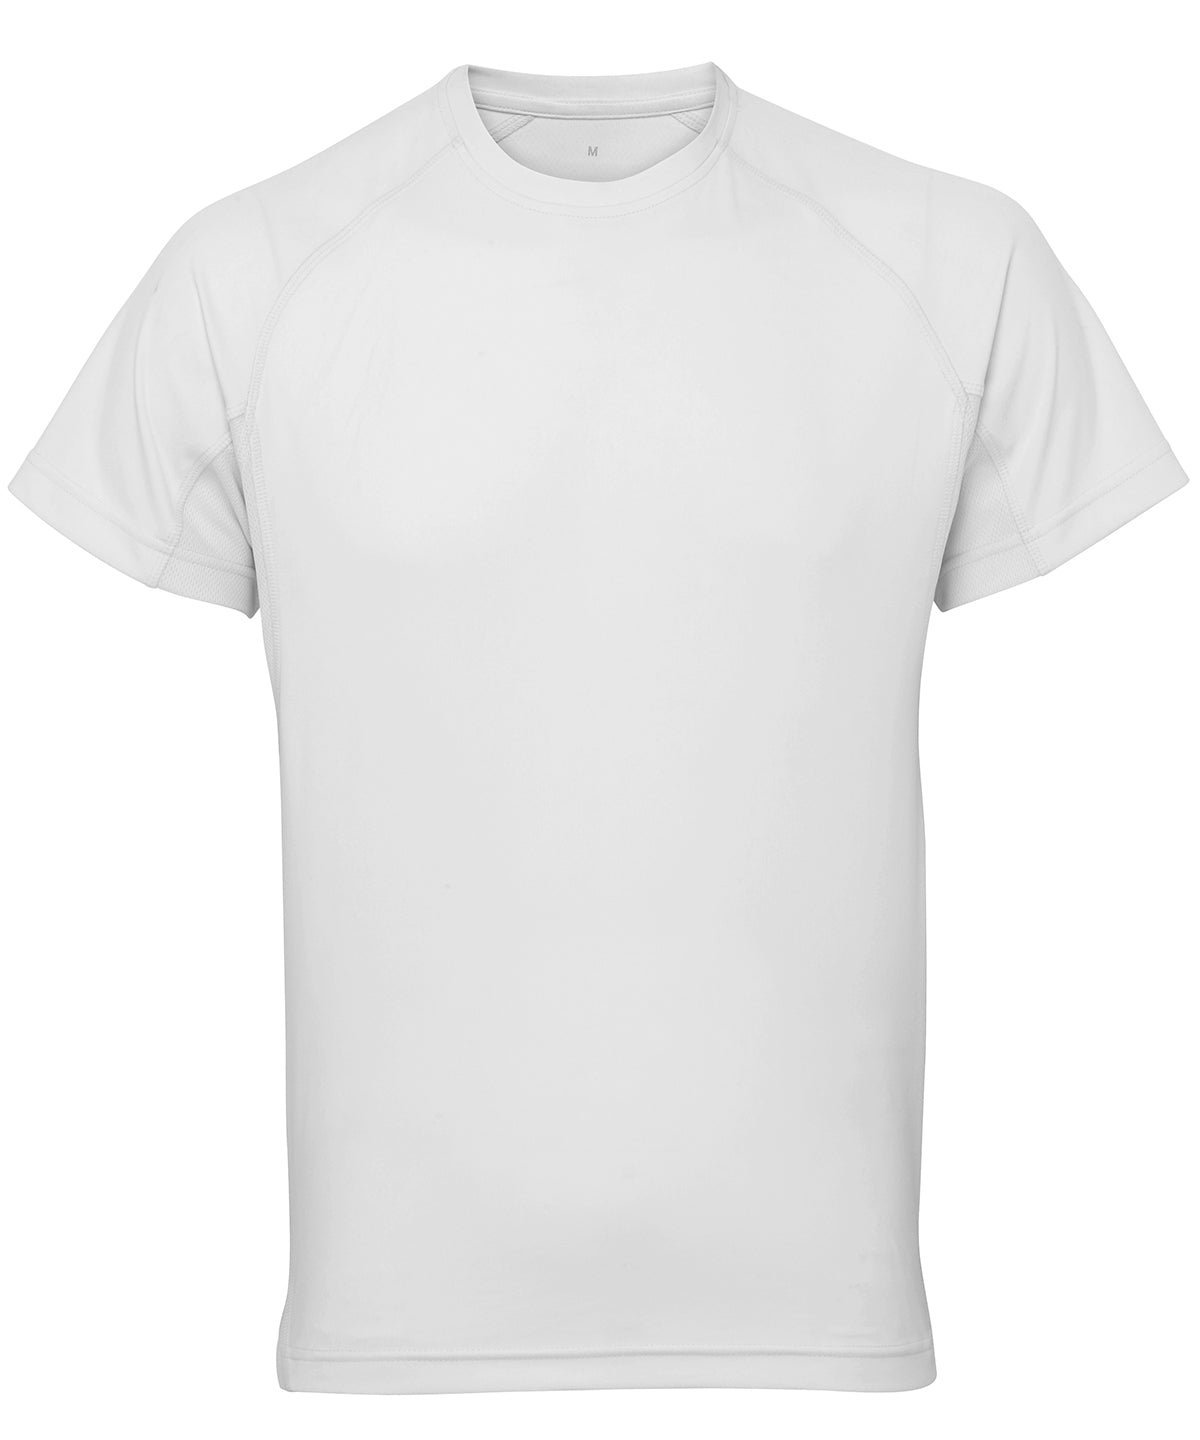 White - TriDri® panelled tech tee T-Shirts TriDri® Activewear & Performance, Athleisurewear, Back to the Gym, Exclusives, Gymwear, Must Haves, Plus Sizes, Rebrandable, S/S 19 Trend Colours, Sports & Leisure, T-Shirts & Vests, UPF Protection Schoolwear Centres